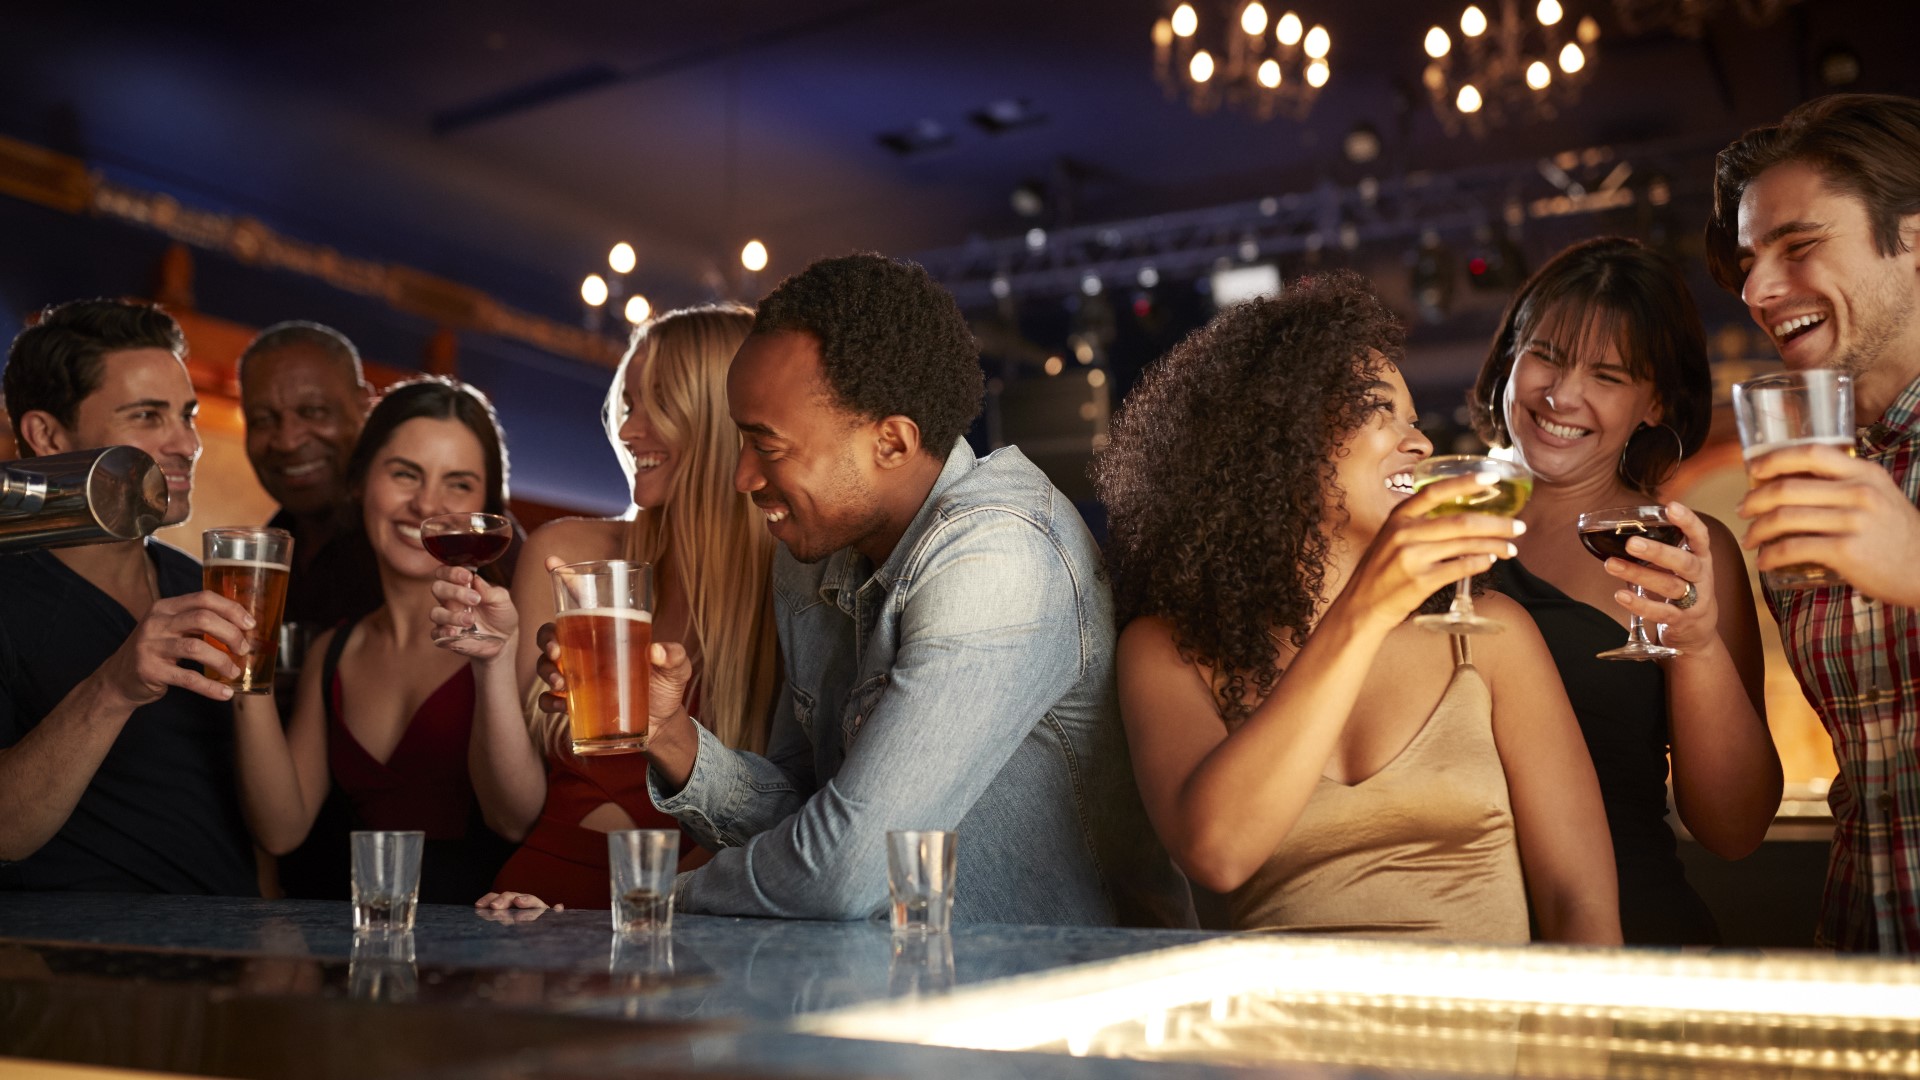 If you're feeling anxious about socializing again, you're not alone. Sponsored by Premera.